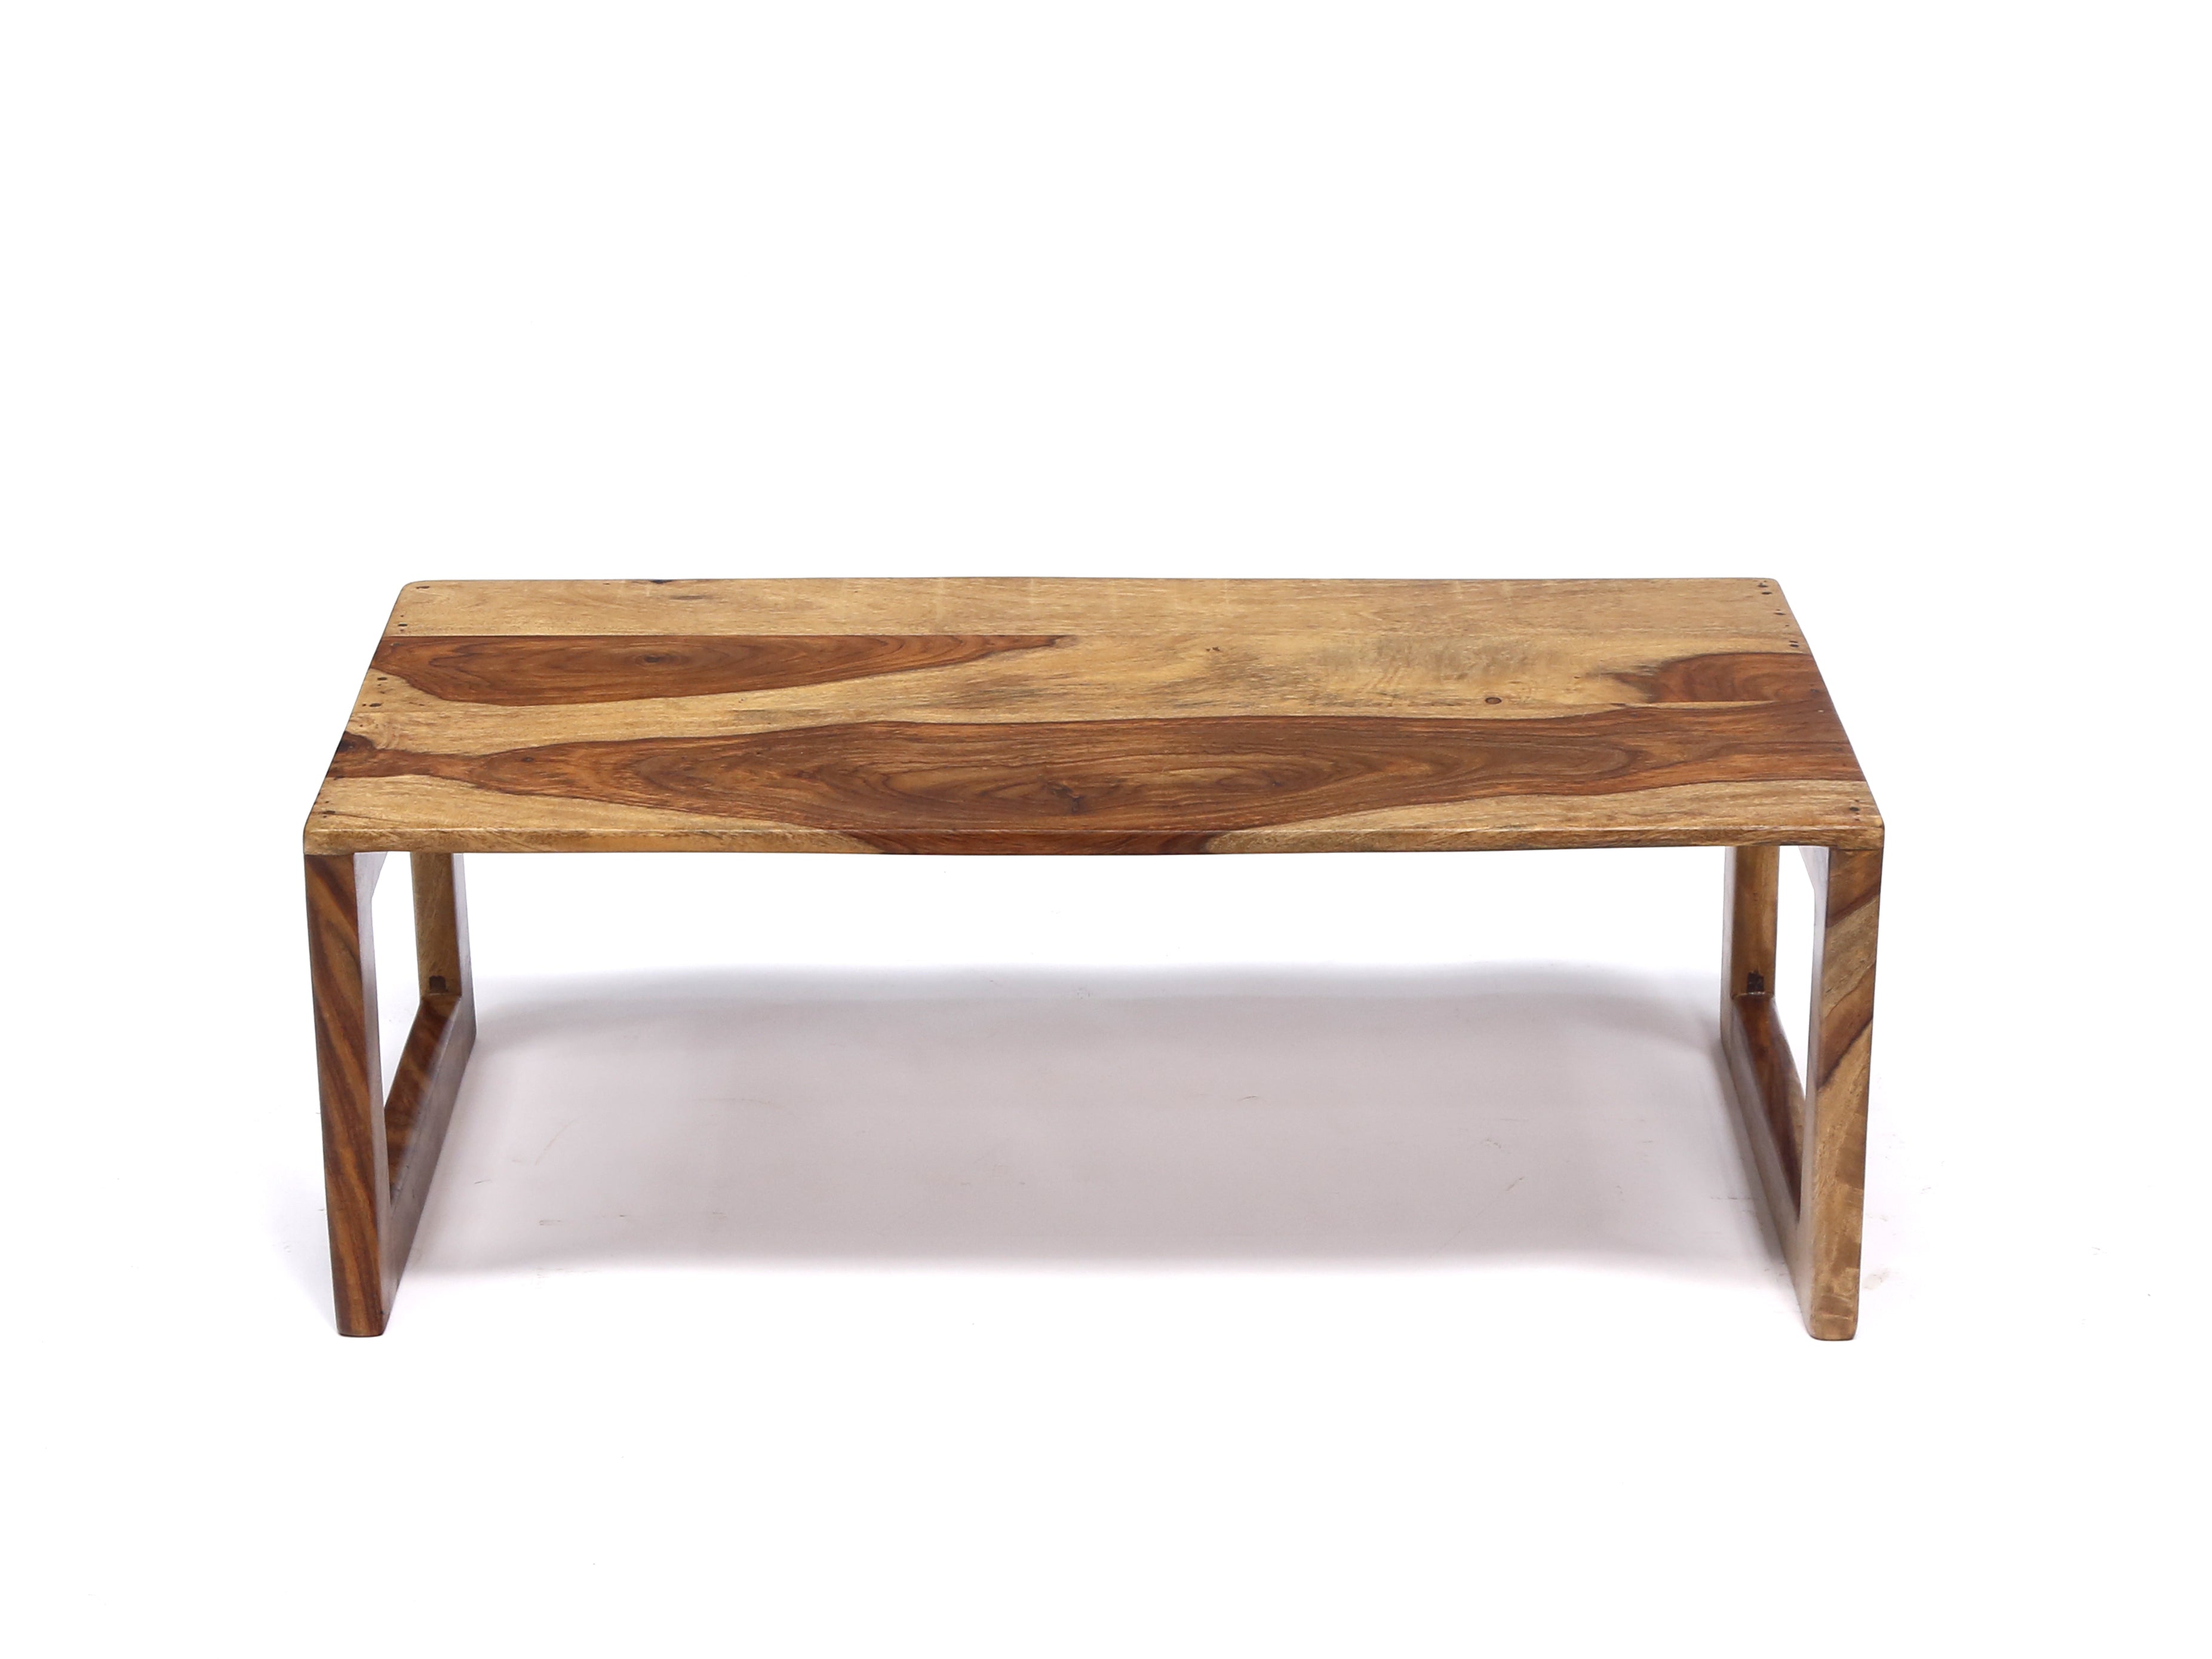 Sheesham wood American Finish Centre Table Coffee Table